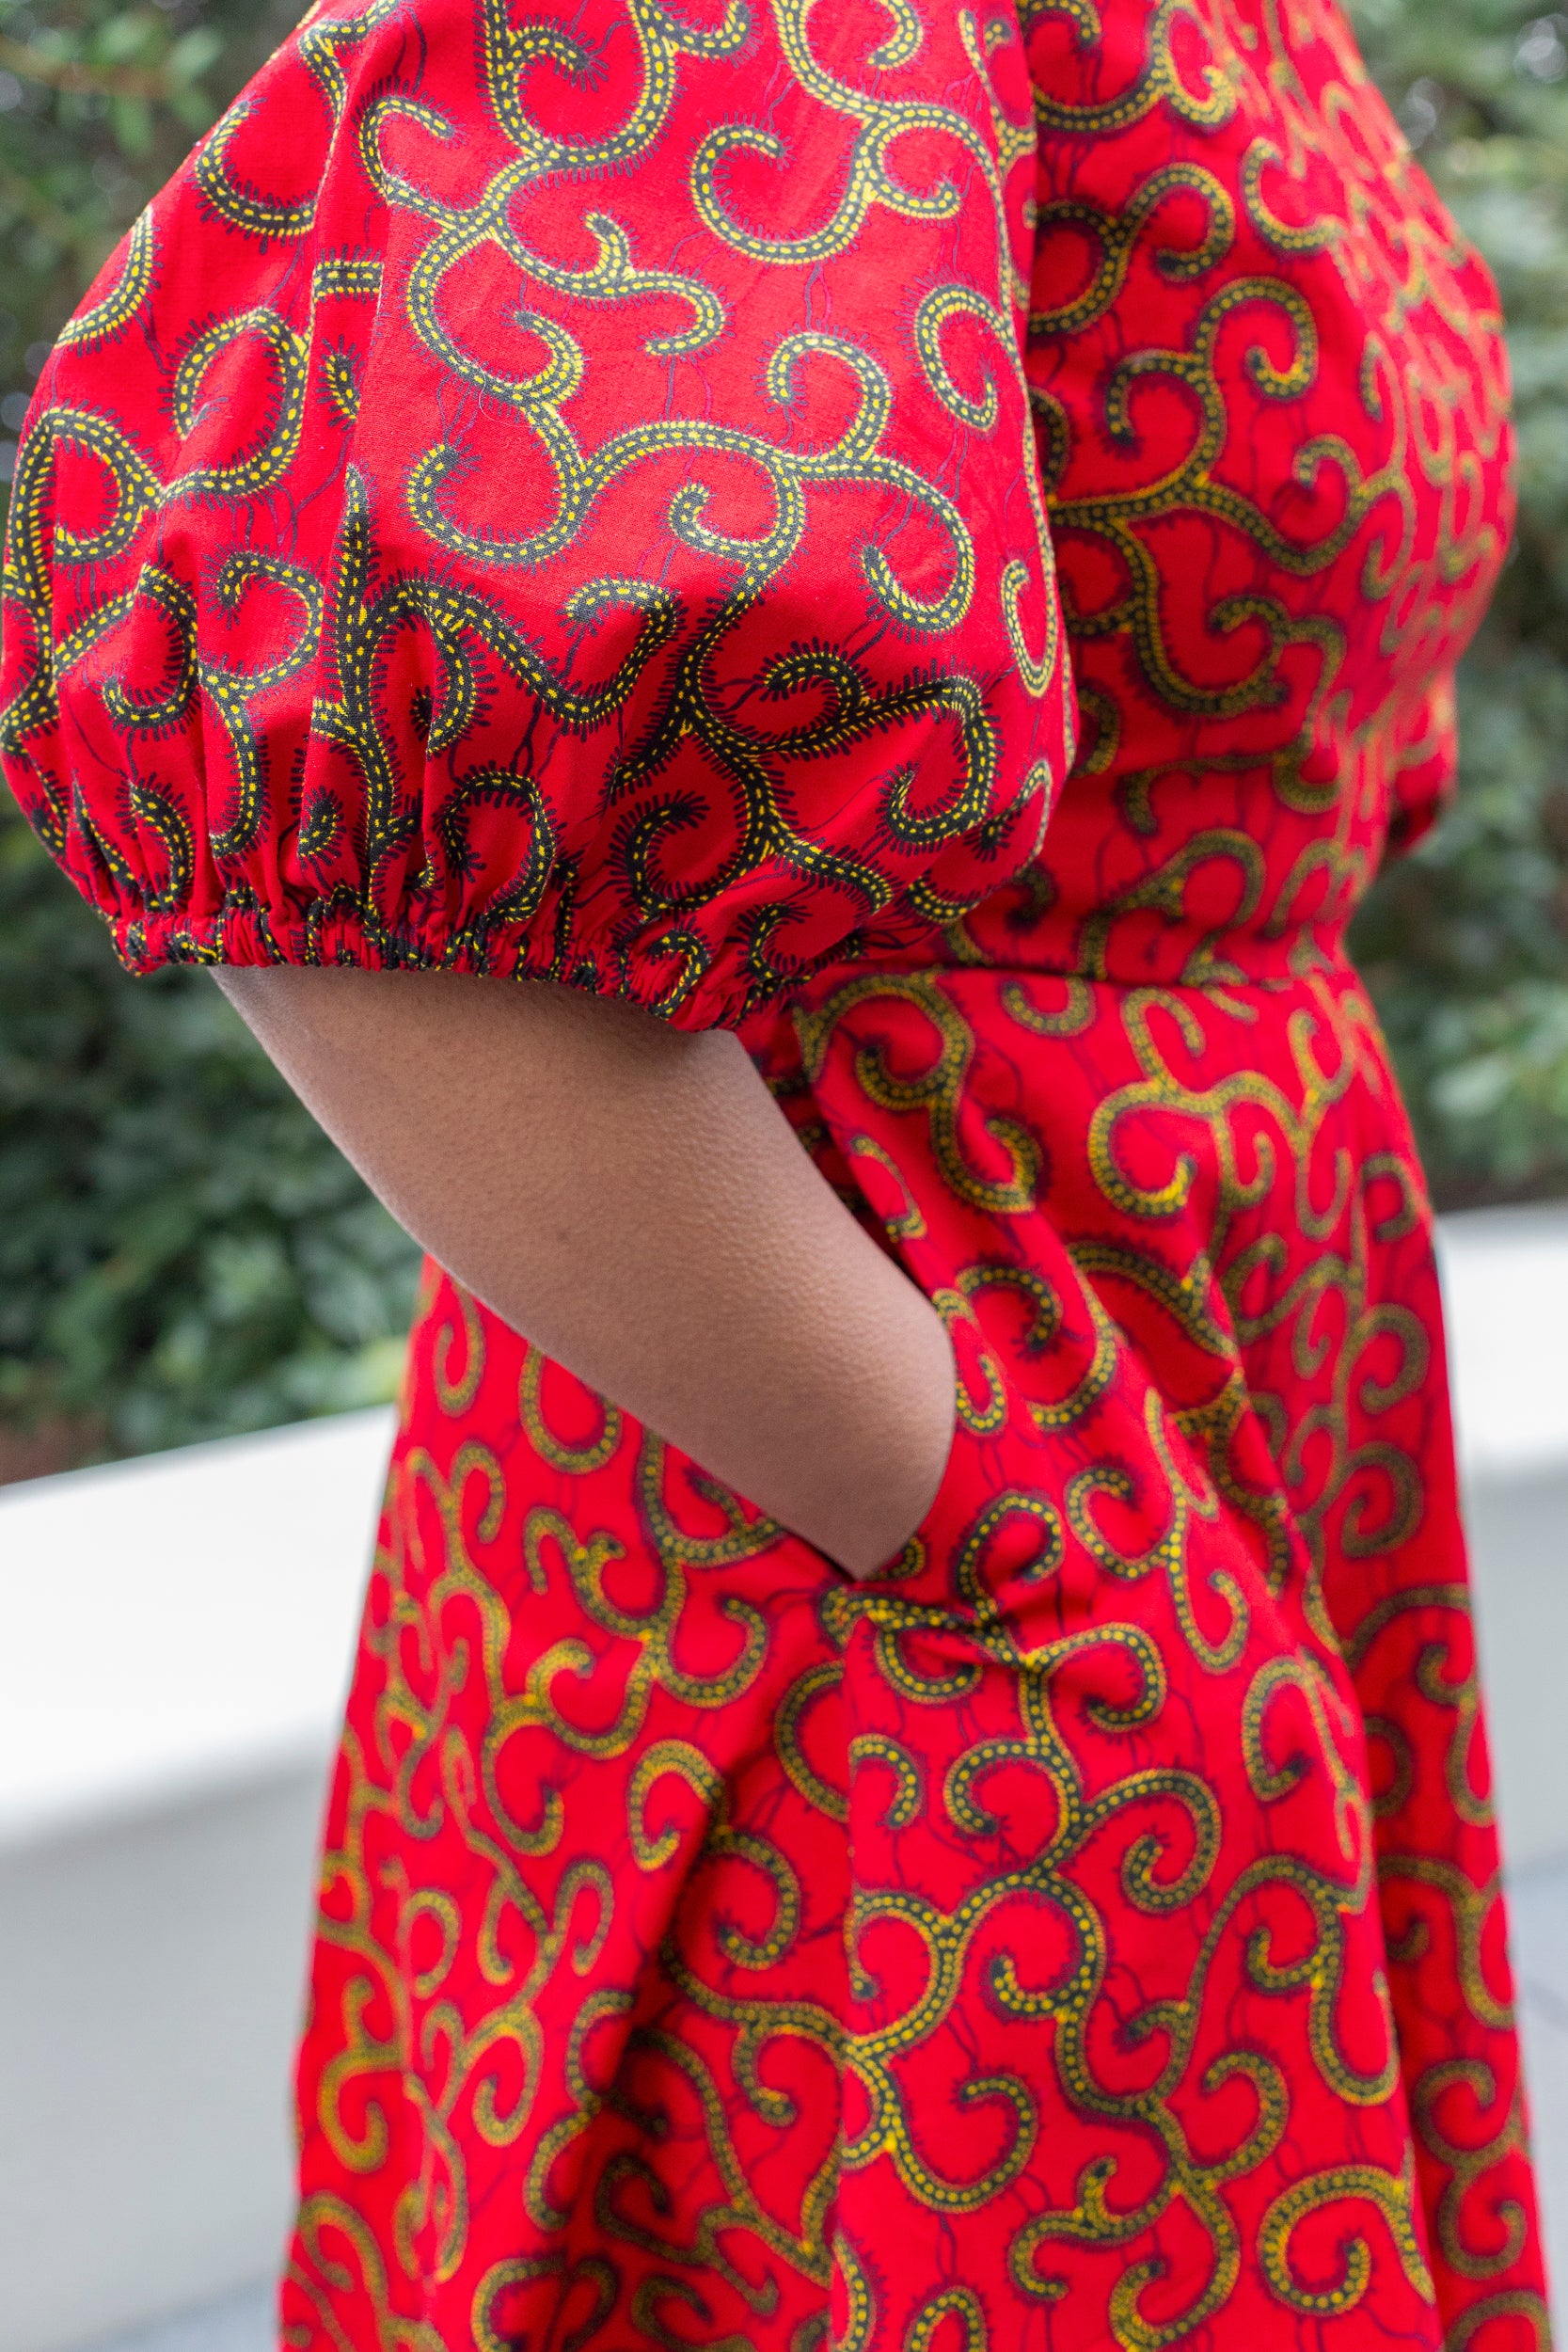 A close-up view highlighting the charming puff sleeve and a practical pocket of the red short dress.